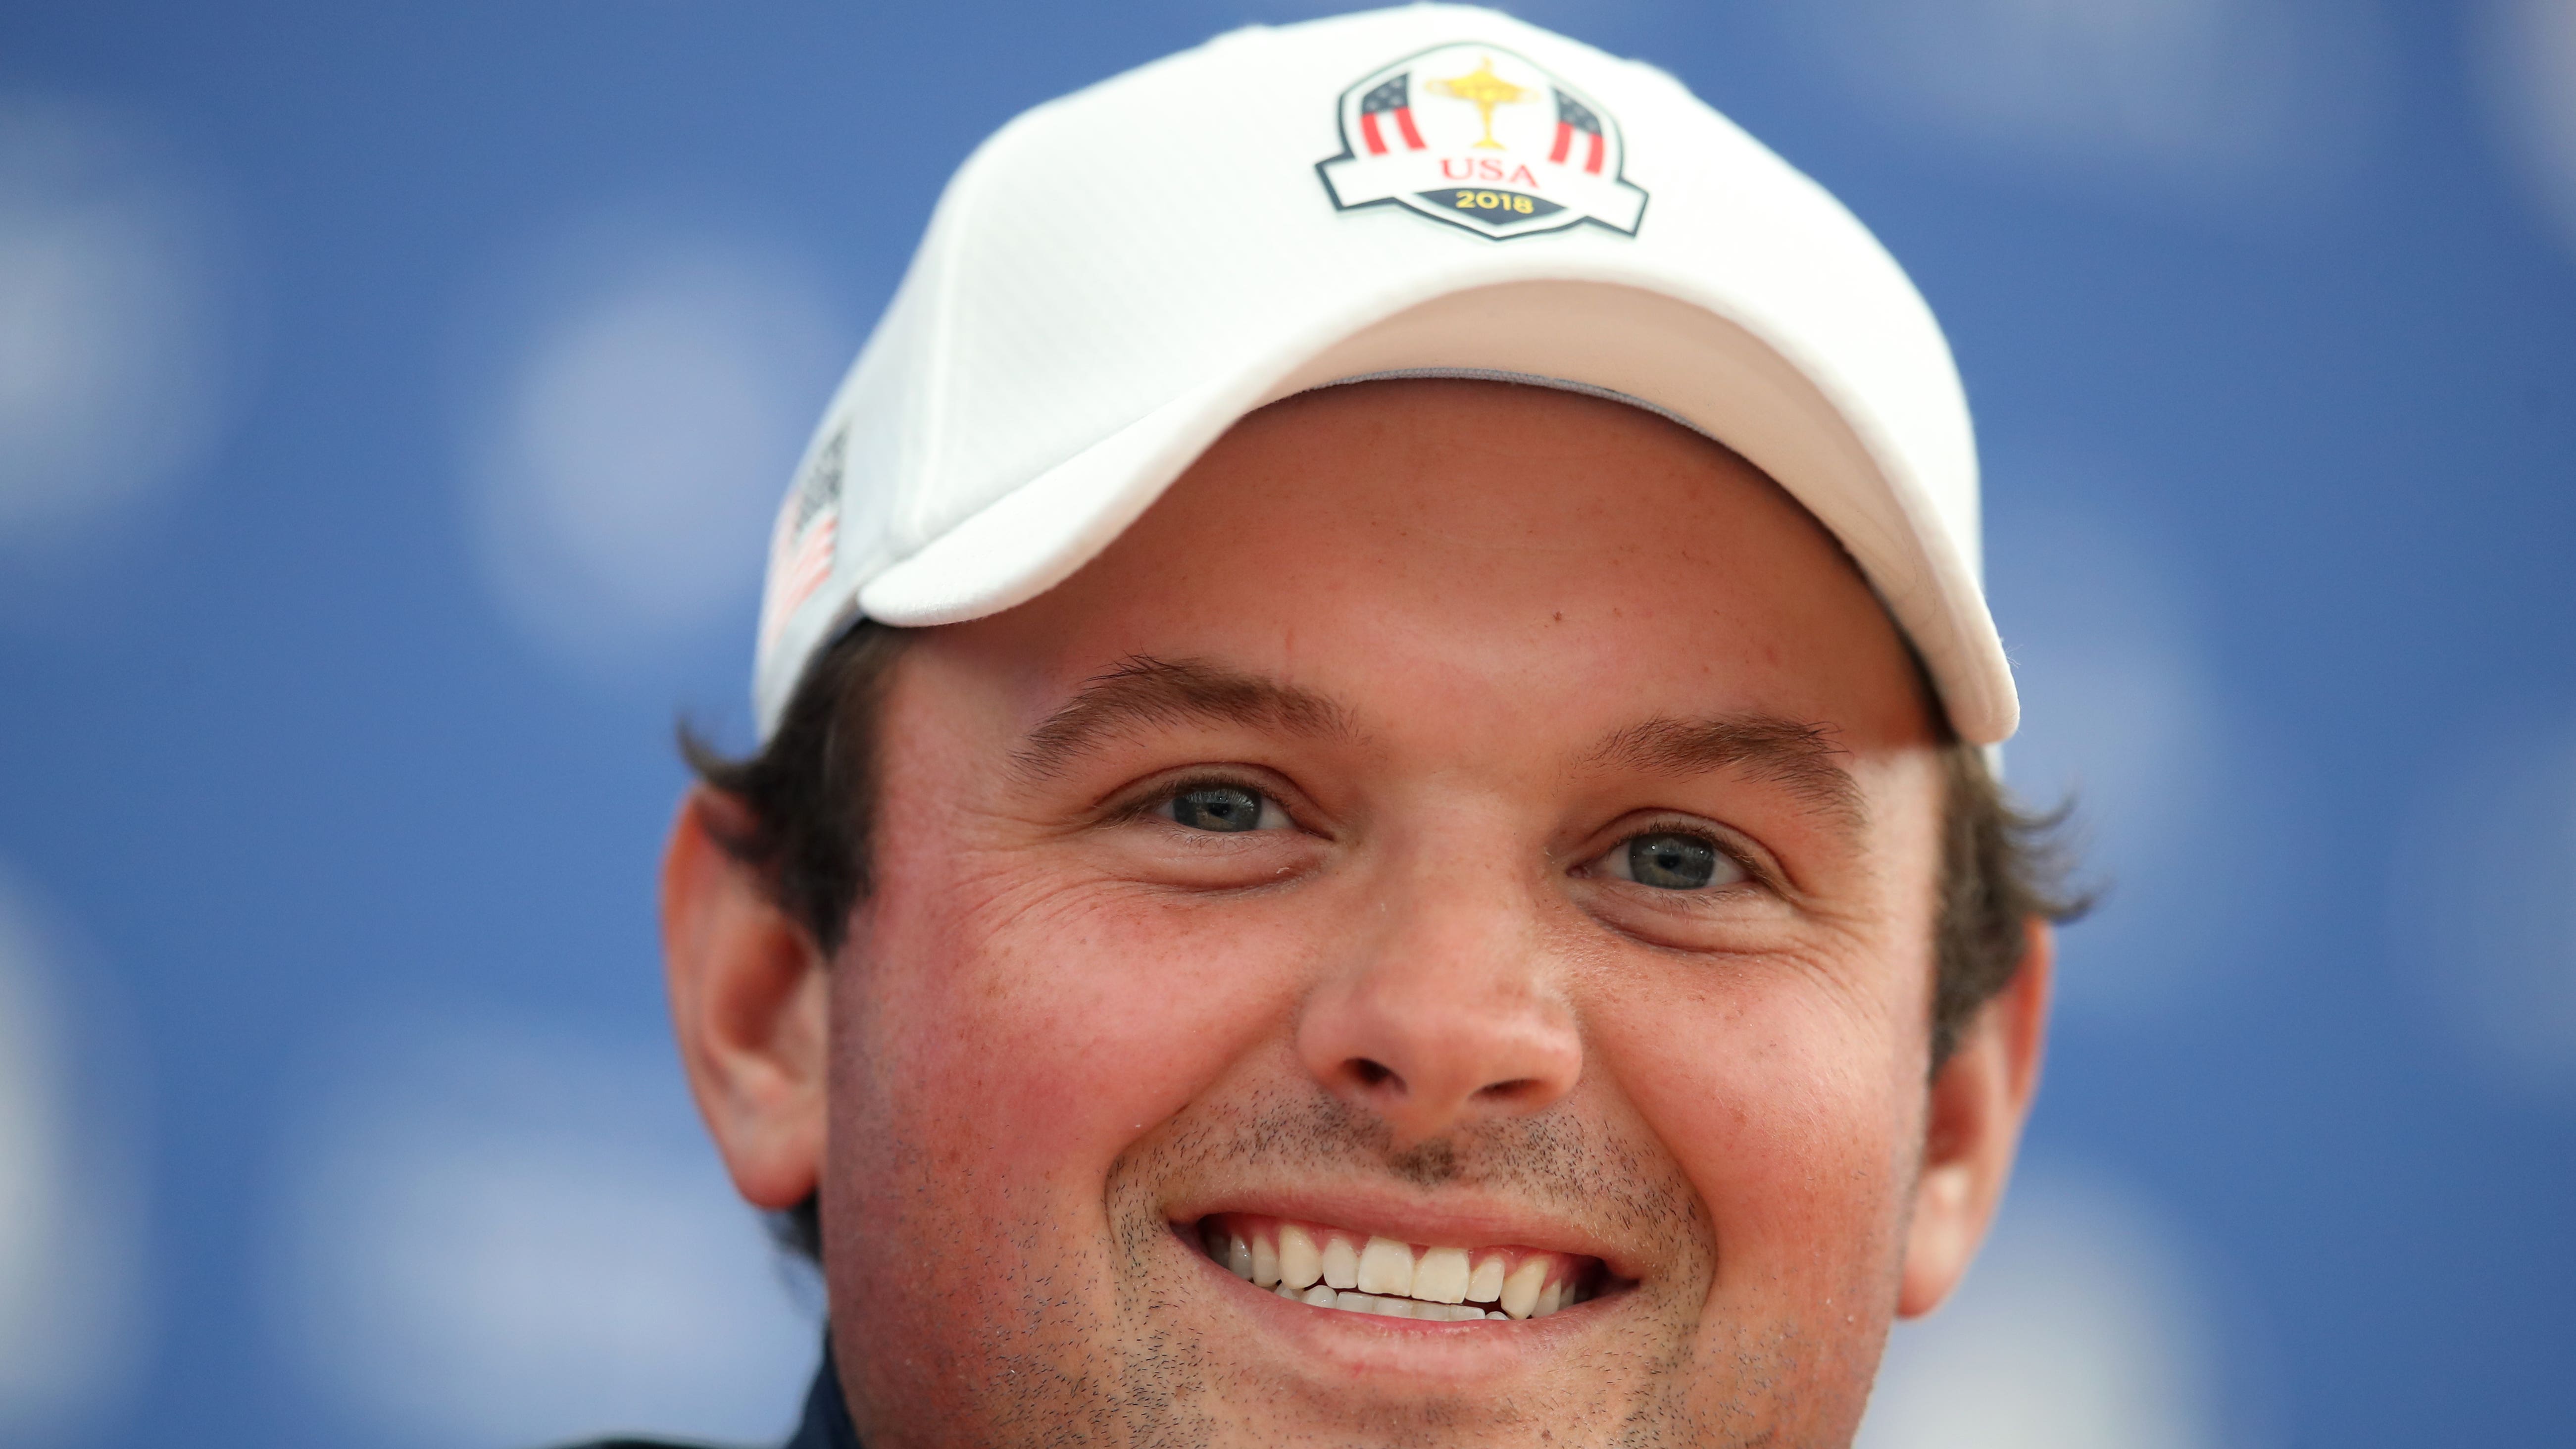 Patrick Reed is happy to be labelled 'Captain America'